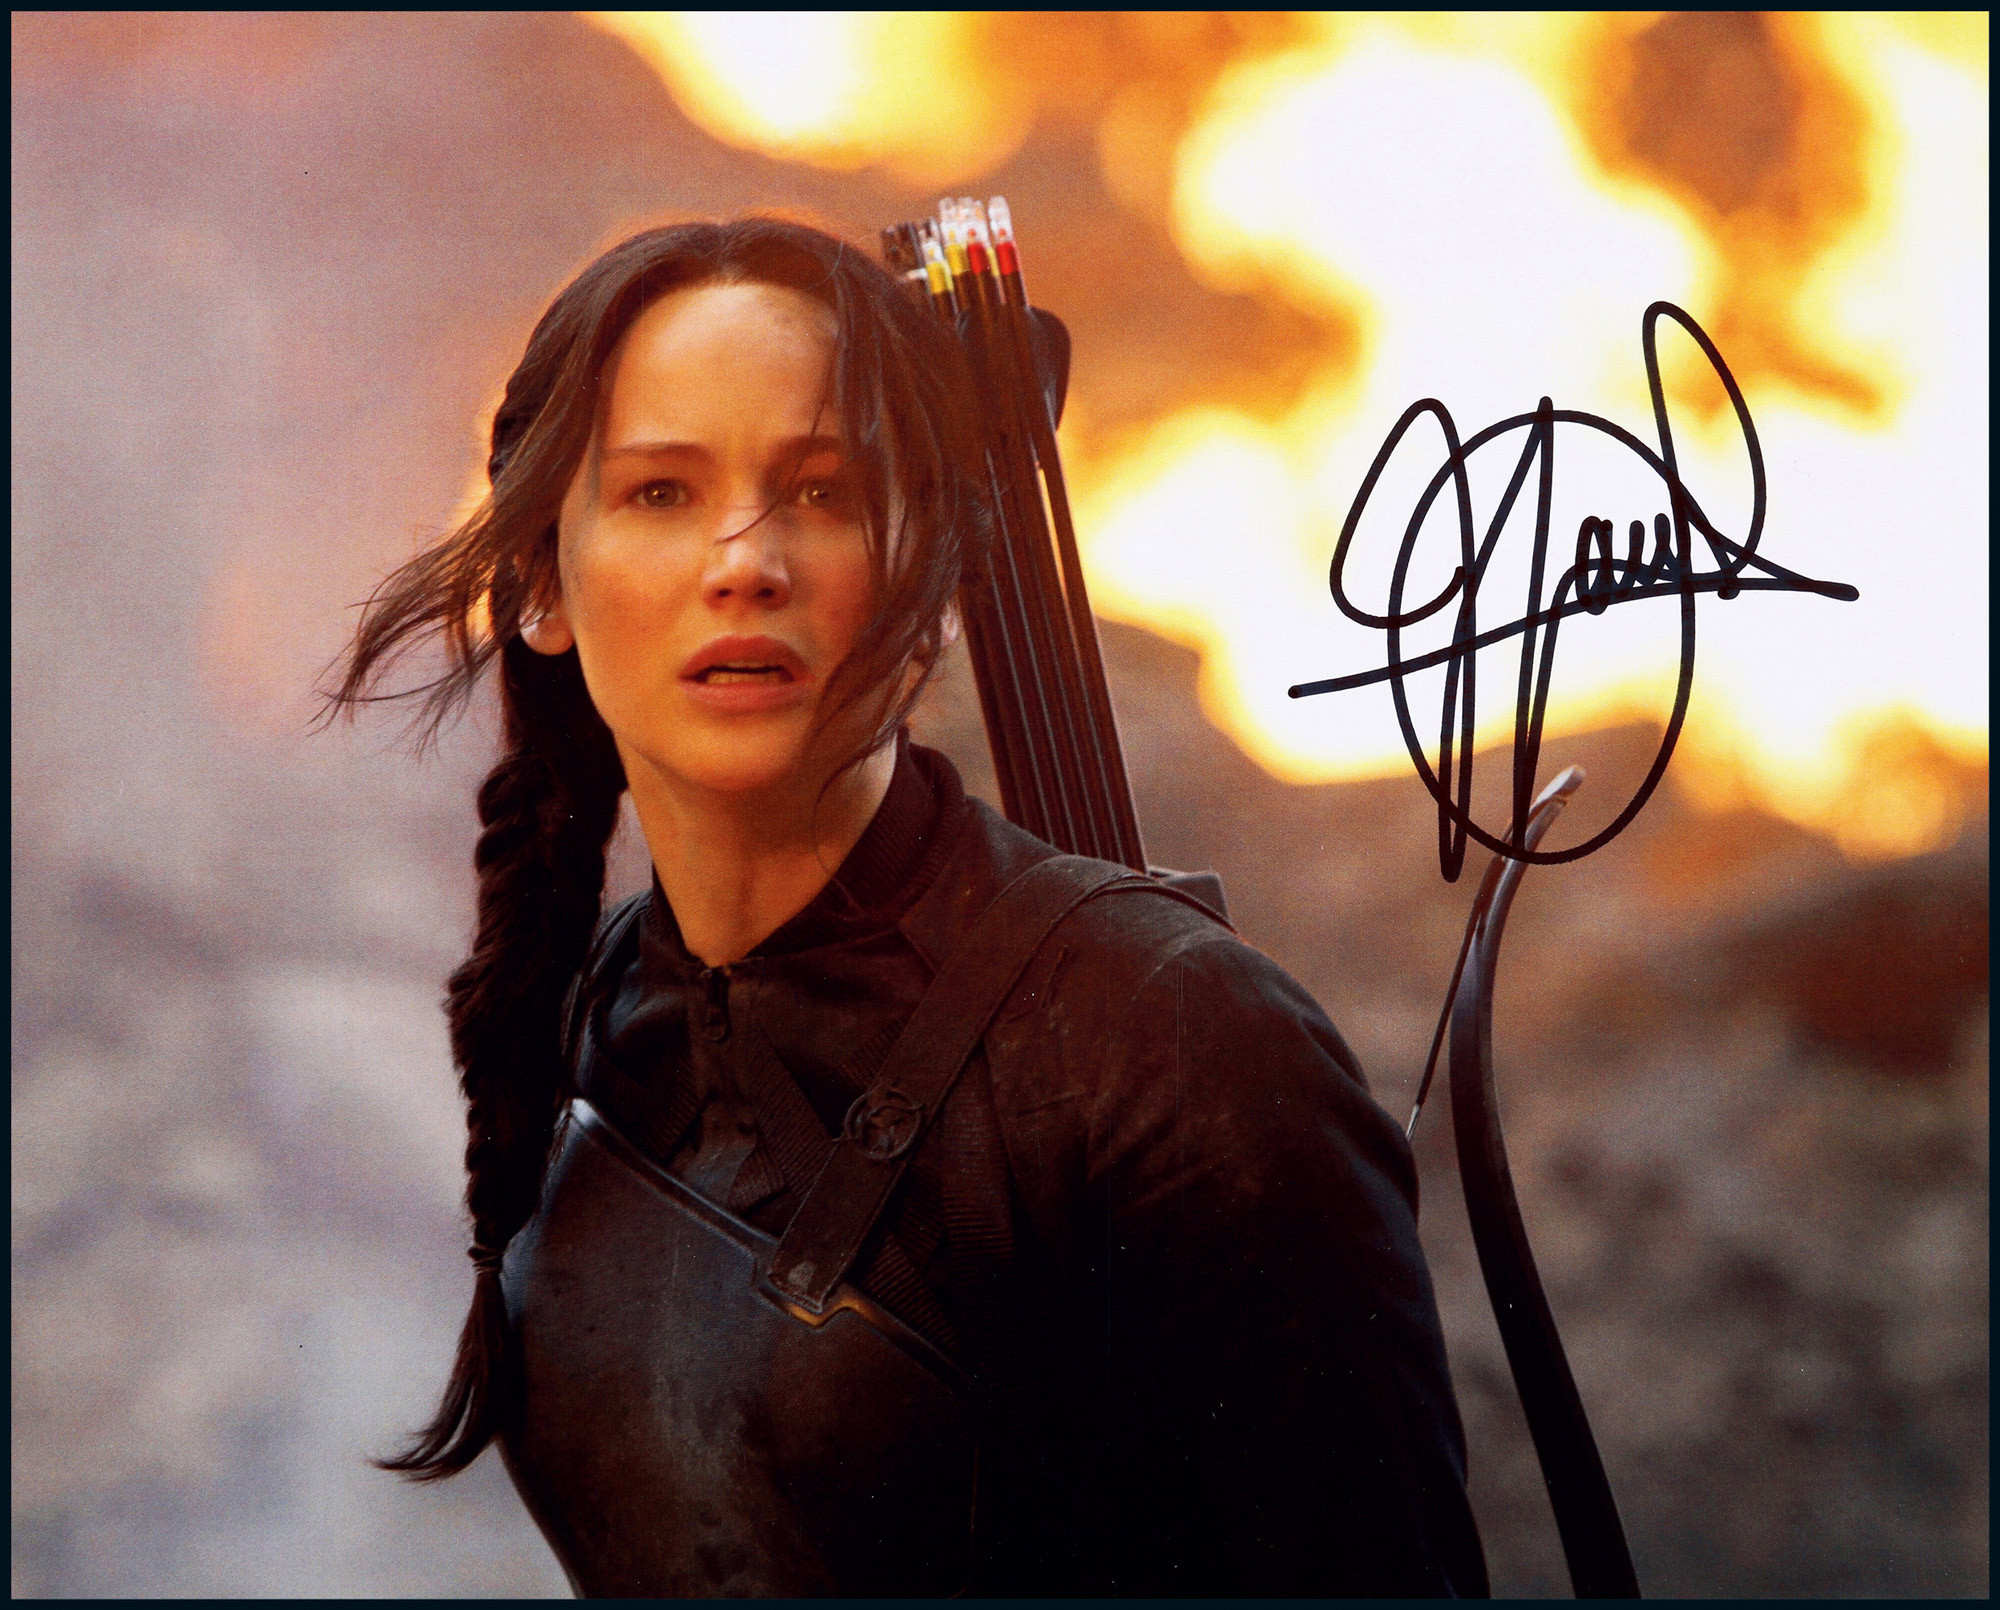 The autographed photo of Jennifer Lawrence, “the Best Actress of the Academy Awards”, with certificate